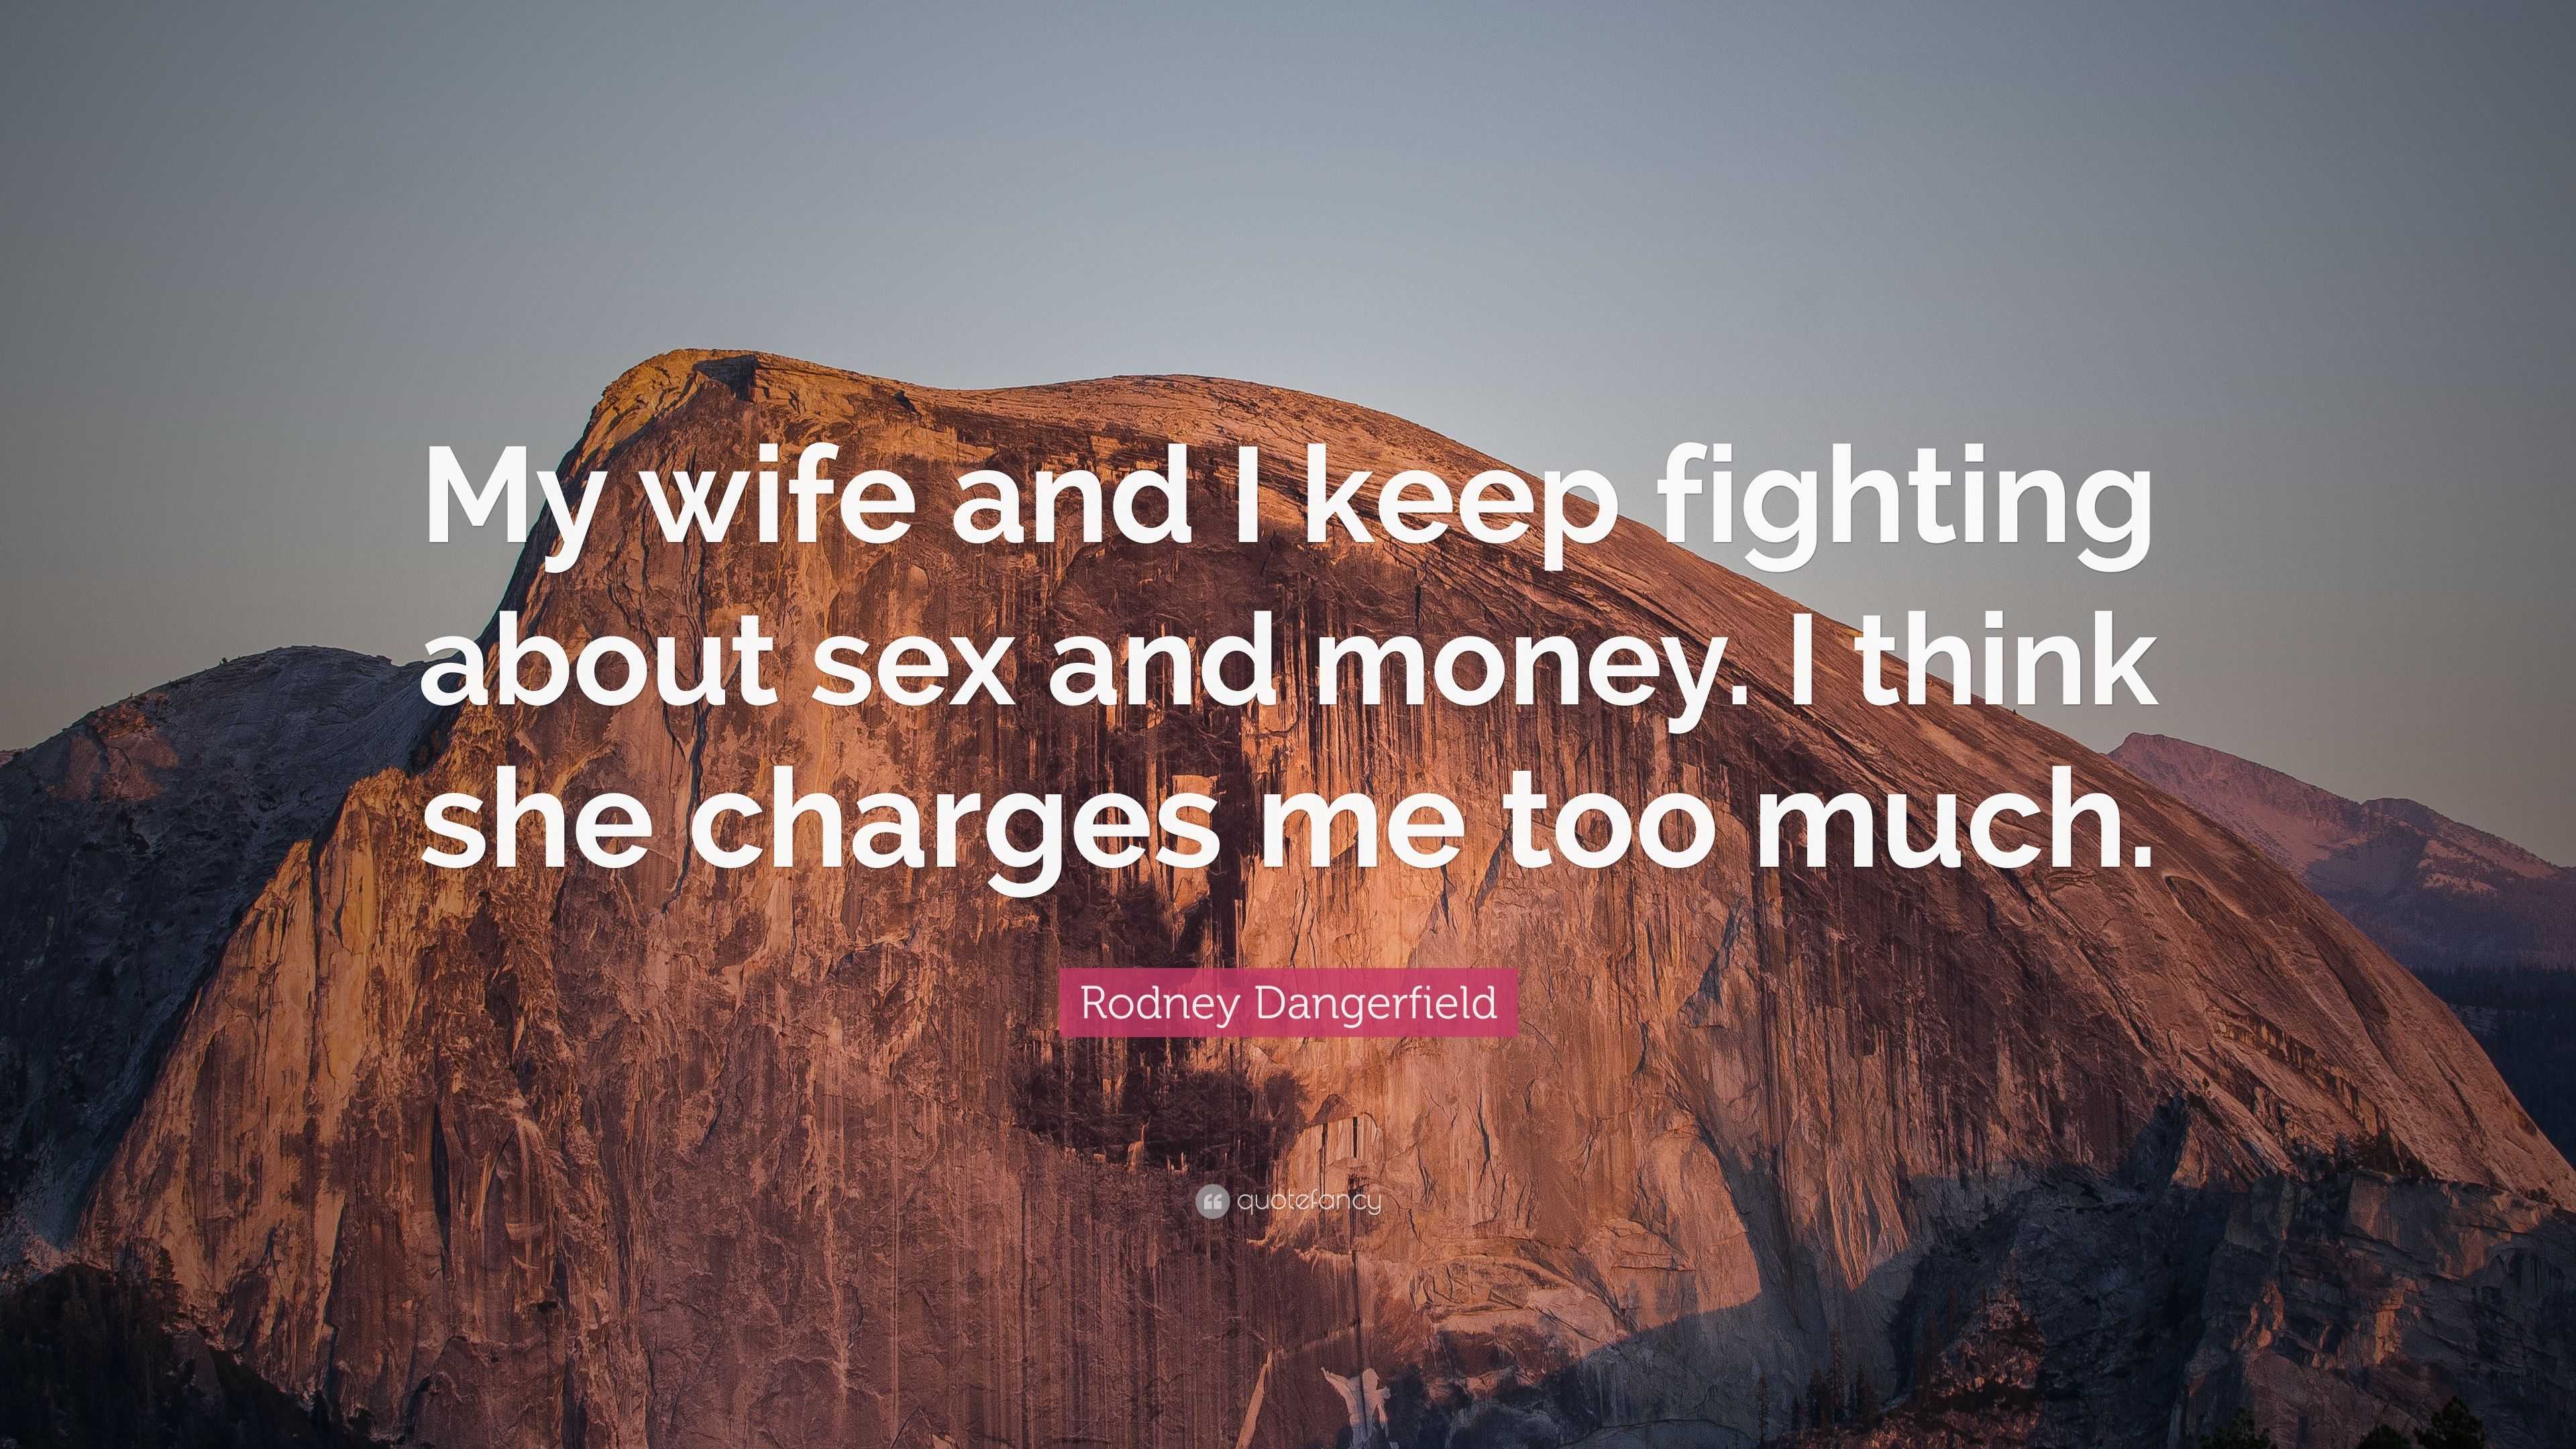 Rodney Dangerfield Quote “My wife and I keep fighting about sex and money pic photo